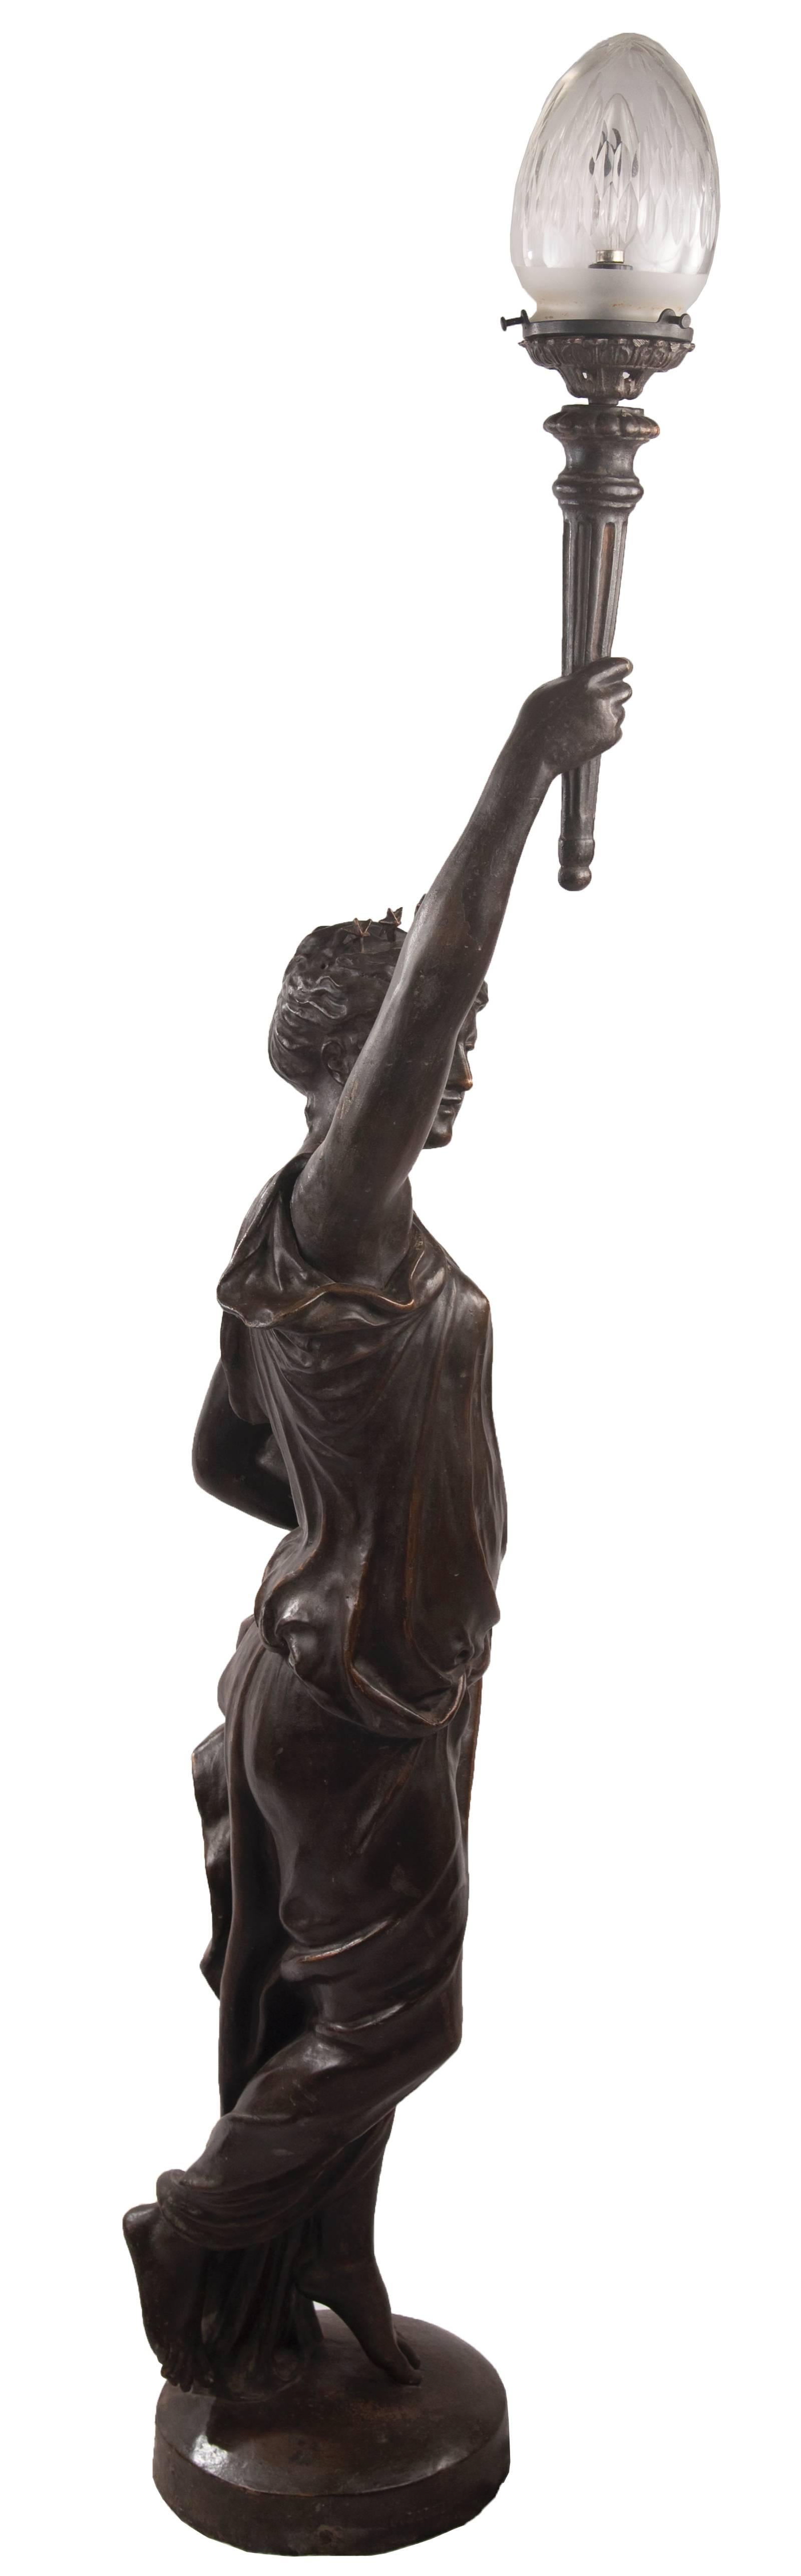 A figurative patinated bronze floor lamp perhaps depicting a representation of Lady Liberty supported on a round base. A six-star crown rests on her head while one hand draws back her robes as to not interfere with her sense of determined motion,